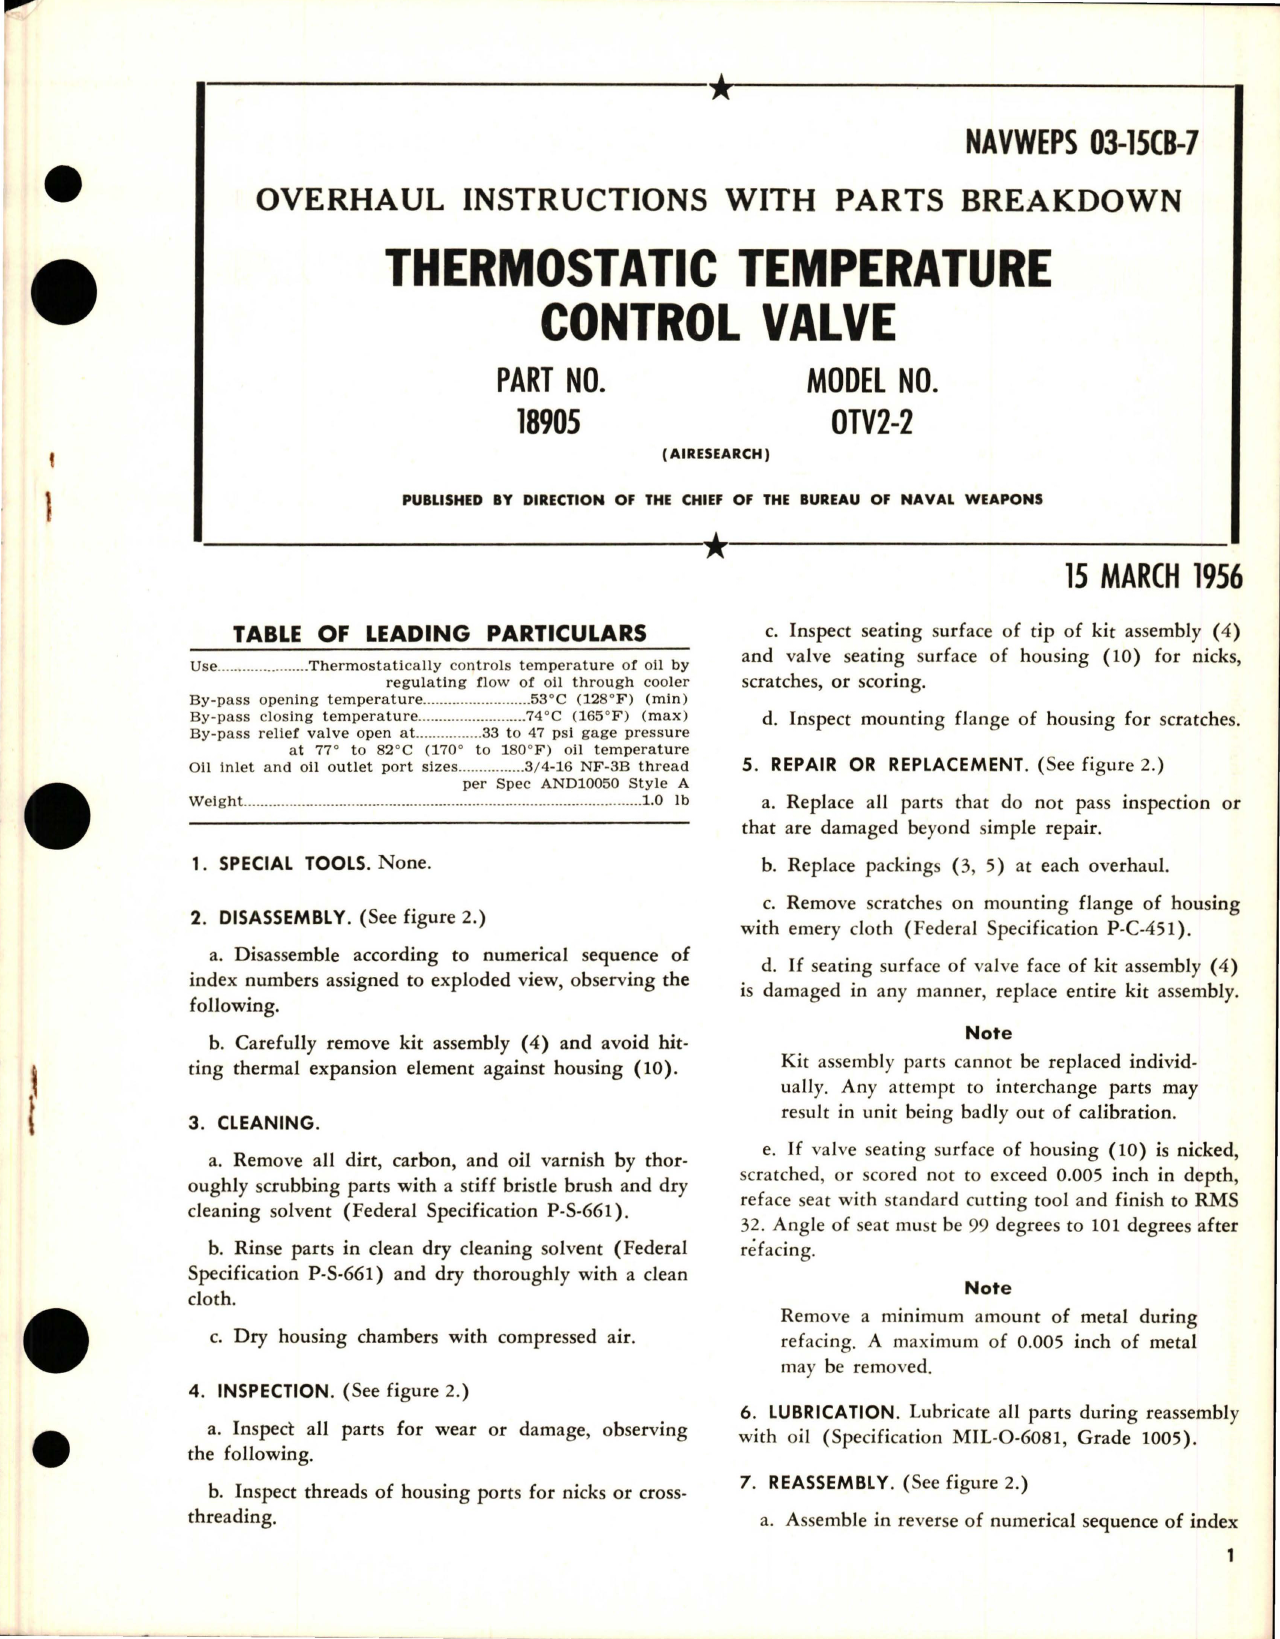 Sample page 1 from AirCorps Library document: Overhaul Instructions with Parts for Thermostatic Temperature Control Valve - Part 18905 - Model OTV2-2